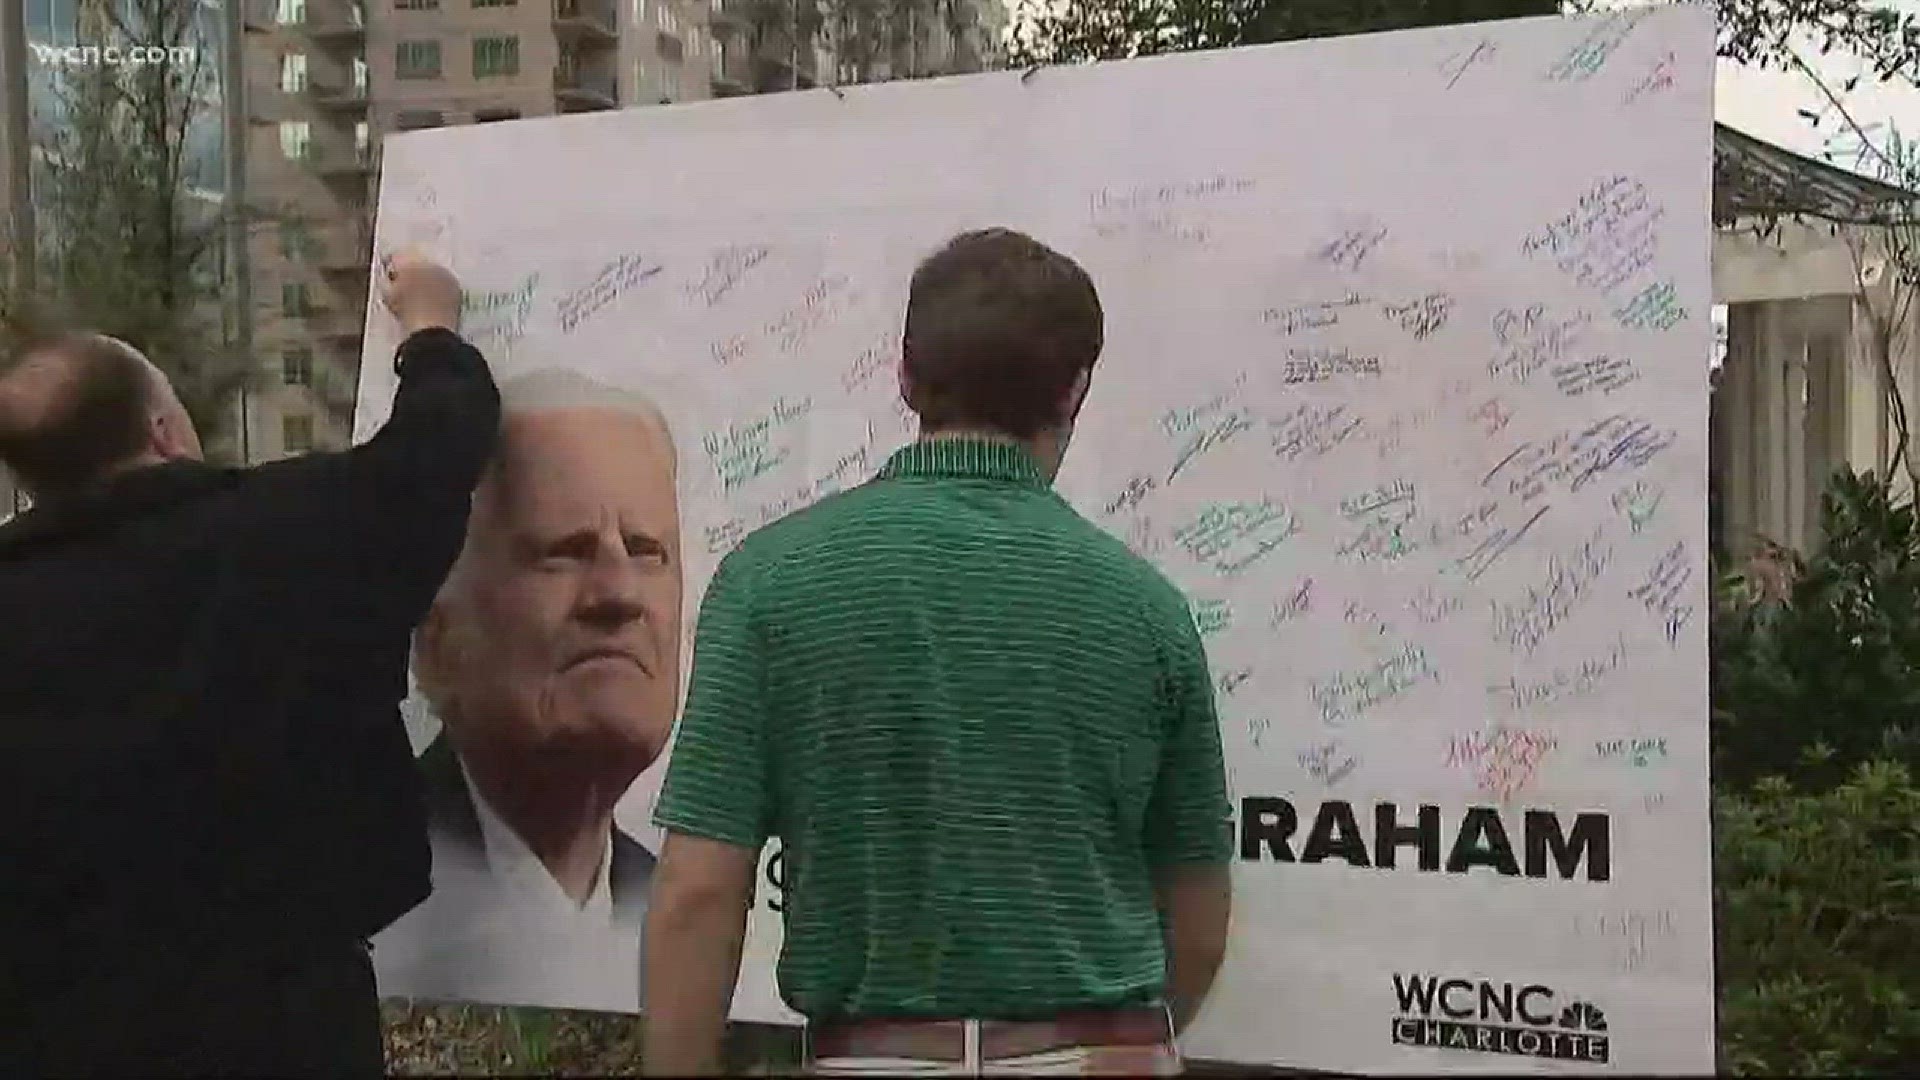 You may have seen some of NBC Charlotte's giant condolence cards for Reverend Billy Graham's family around town. There are still a few cards left that NBC Charlotte would love for you to sign a message or memory of Rev. Graham.